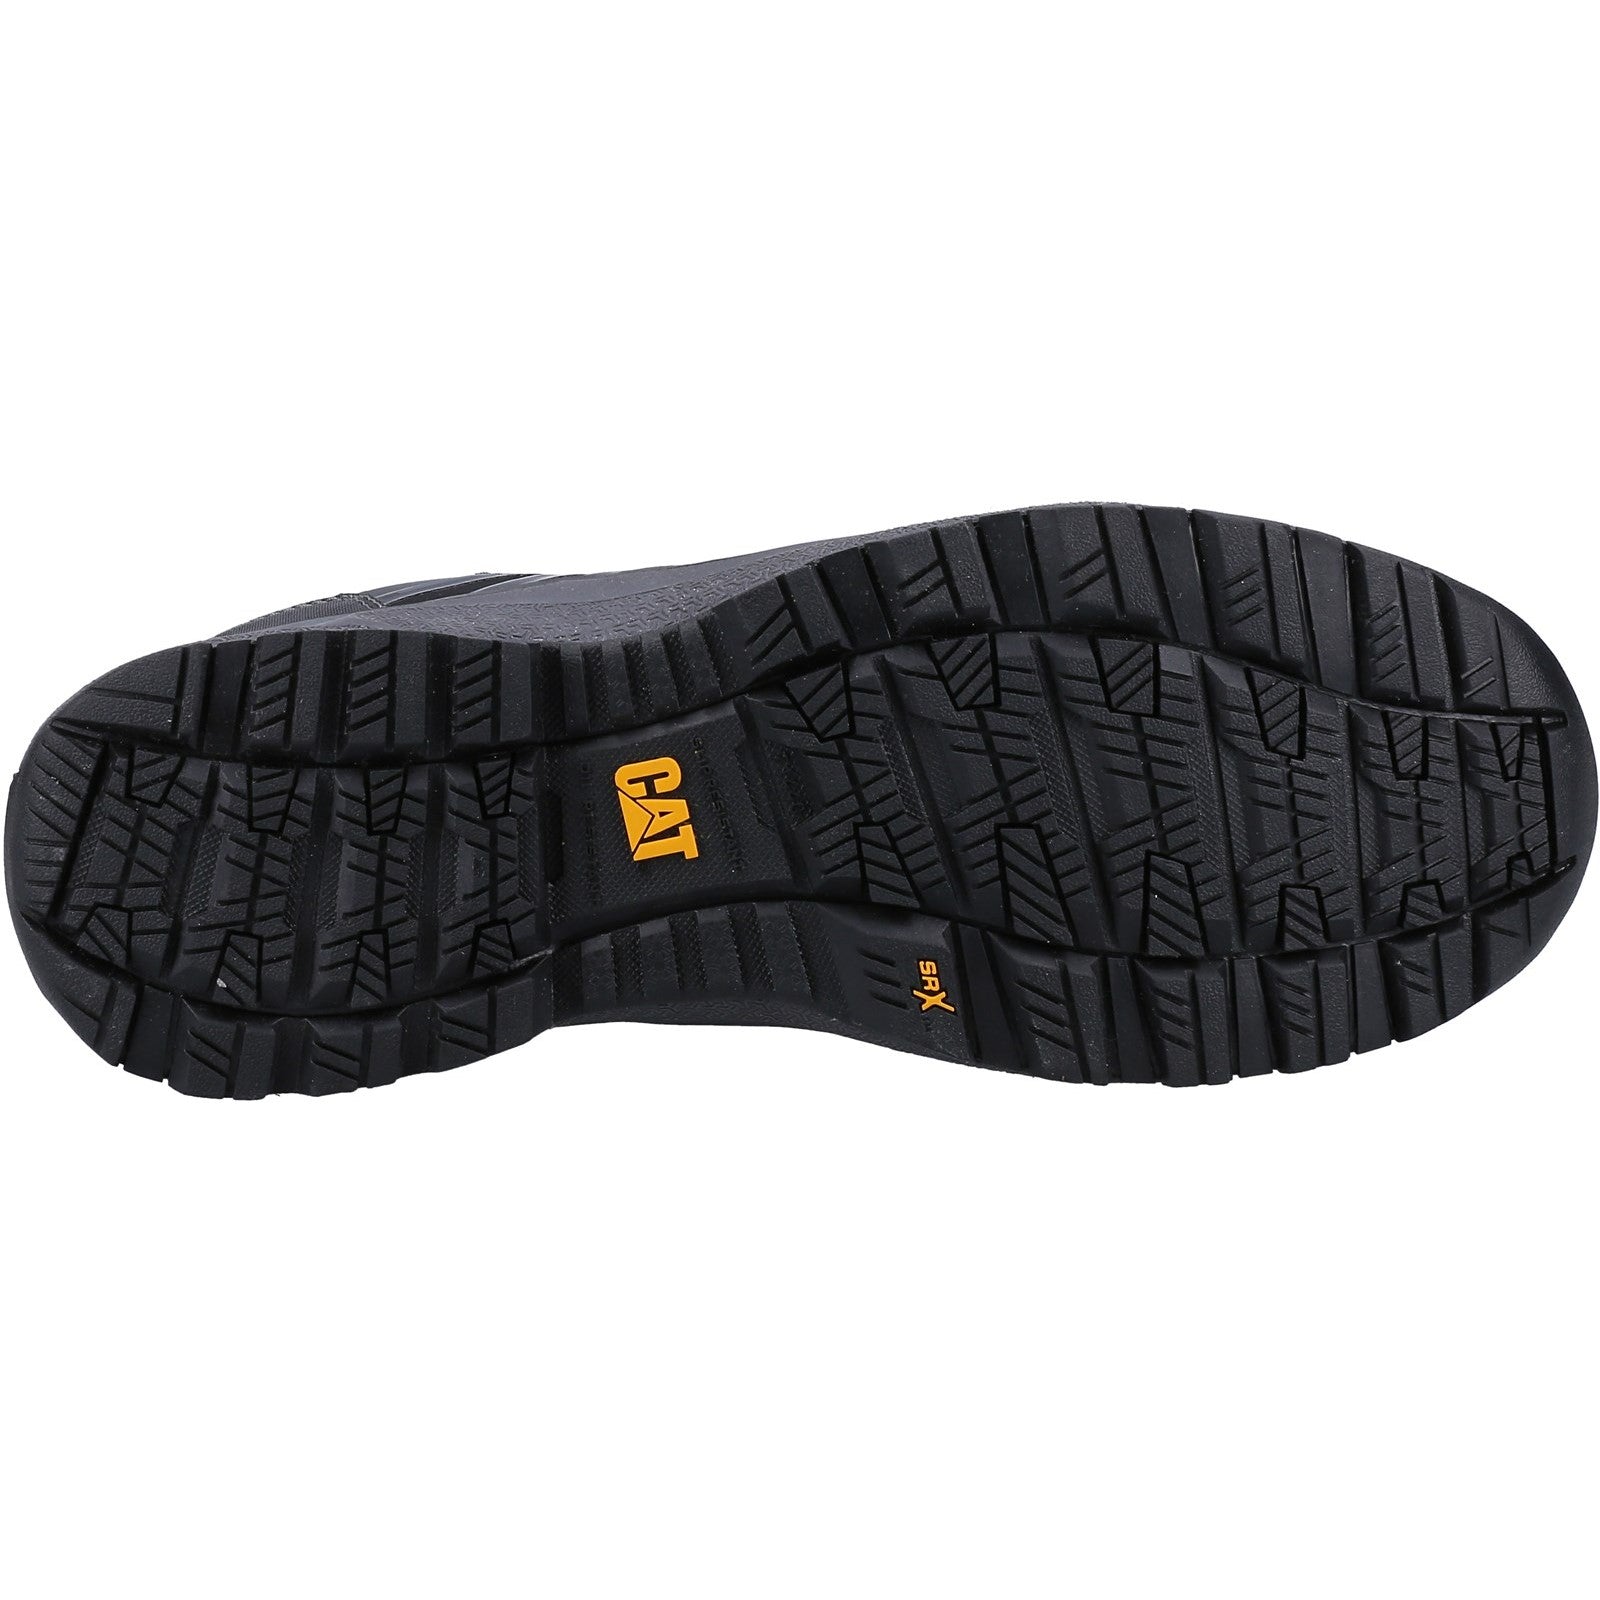 Caterpillar Charge S3 Safety Trainer